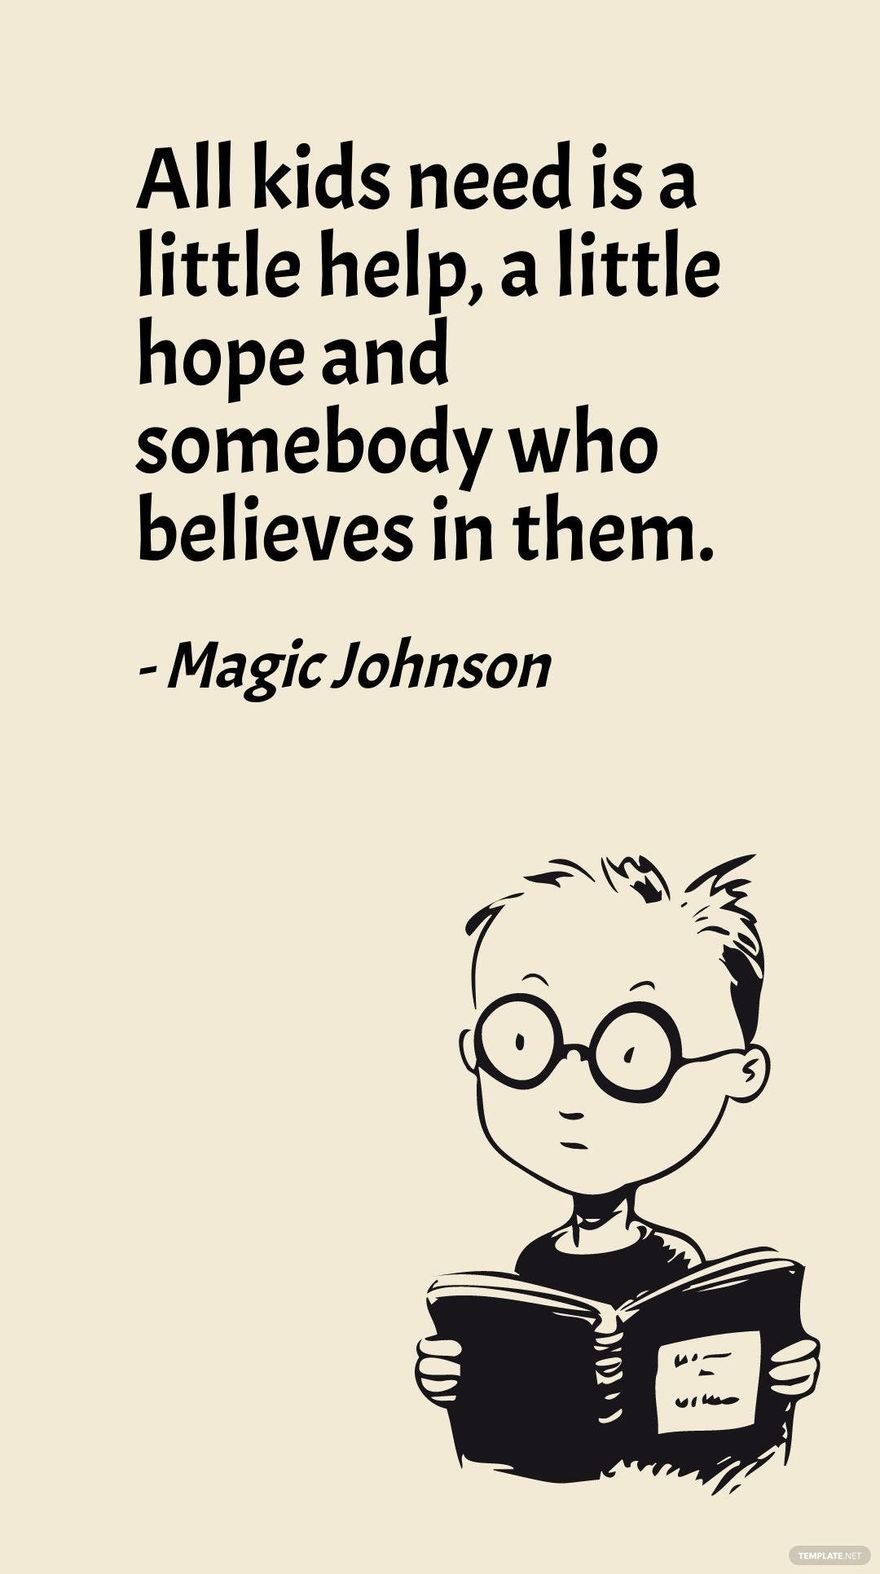 Magic Johnson - All kids need is a little help, a little hope and somebody who believes in them.